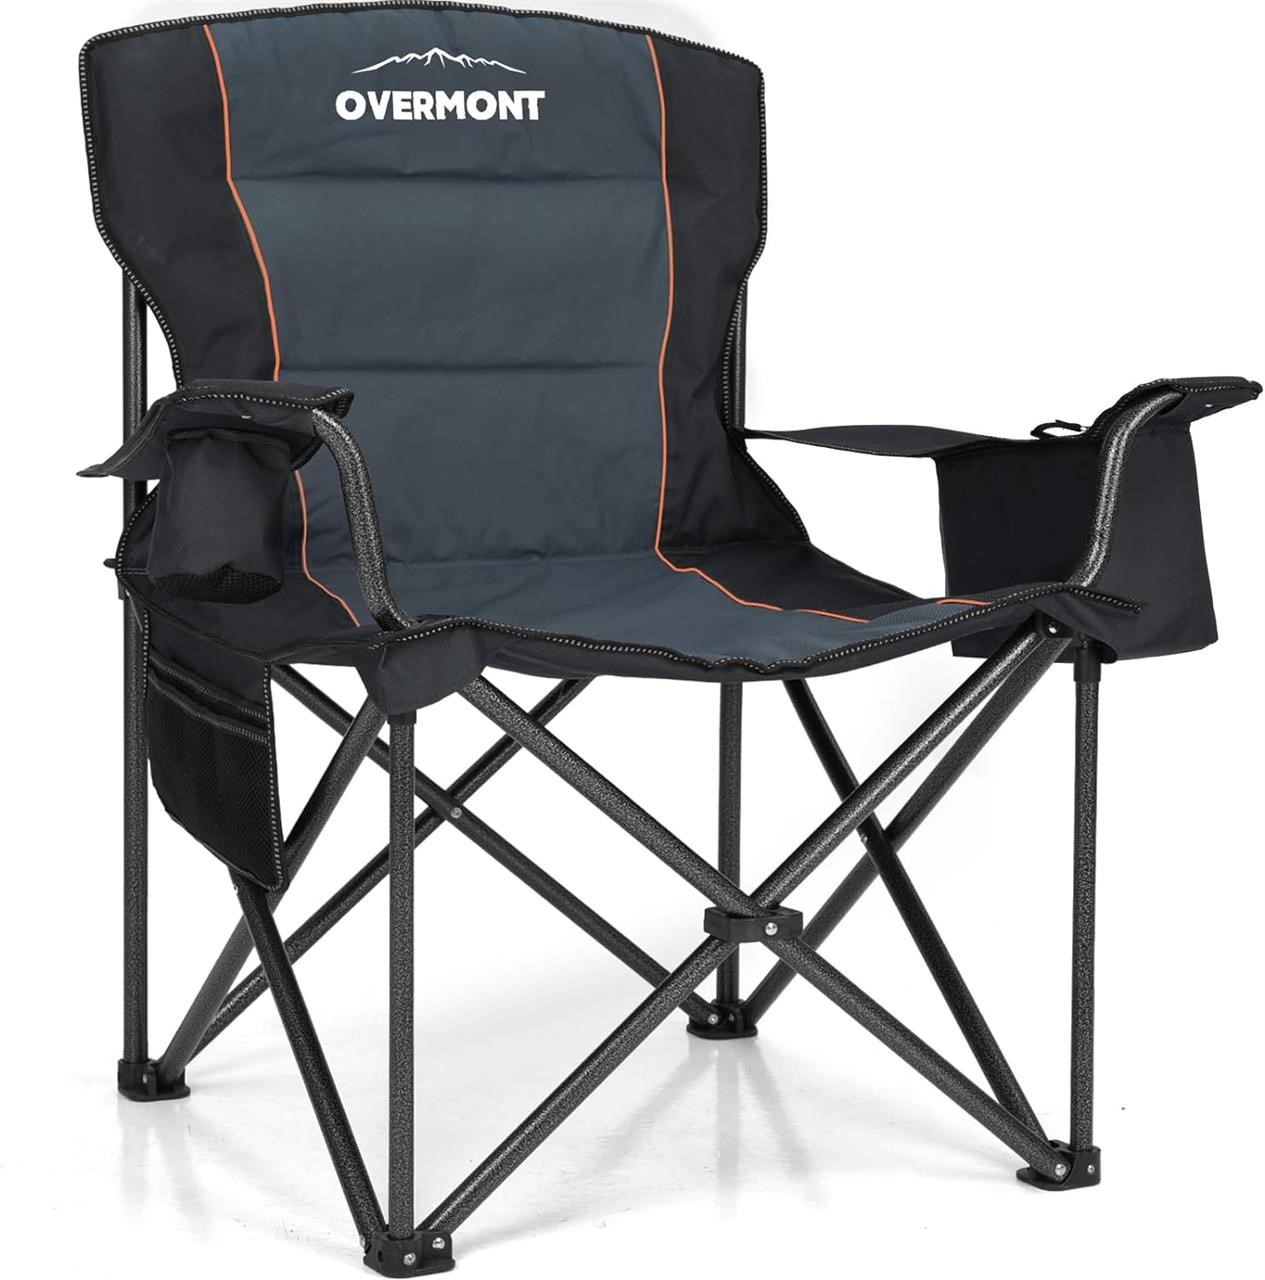 Overmont 450lbs Folding Camp Chair